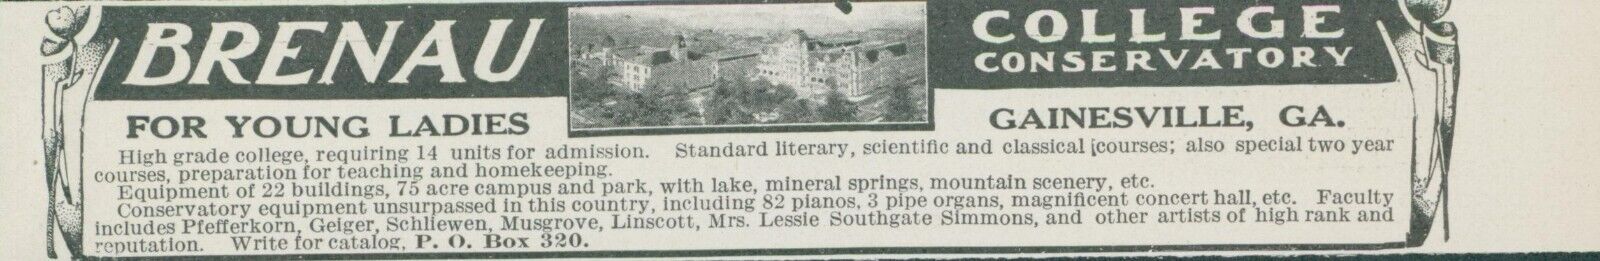 1910 Brenau College Conservatory For Young Ladies Gainesville GA Print Ad CO2